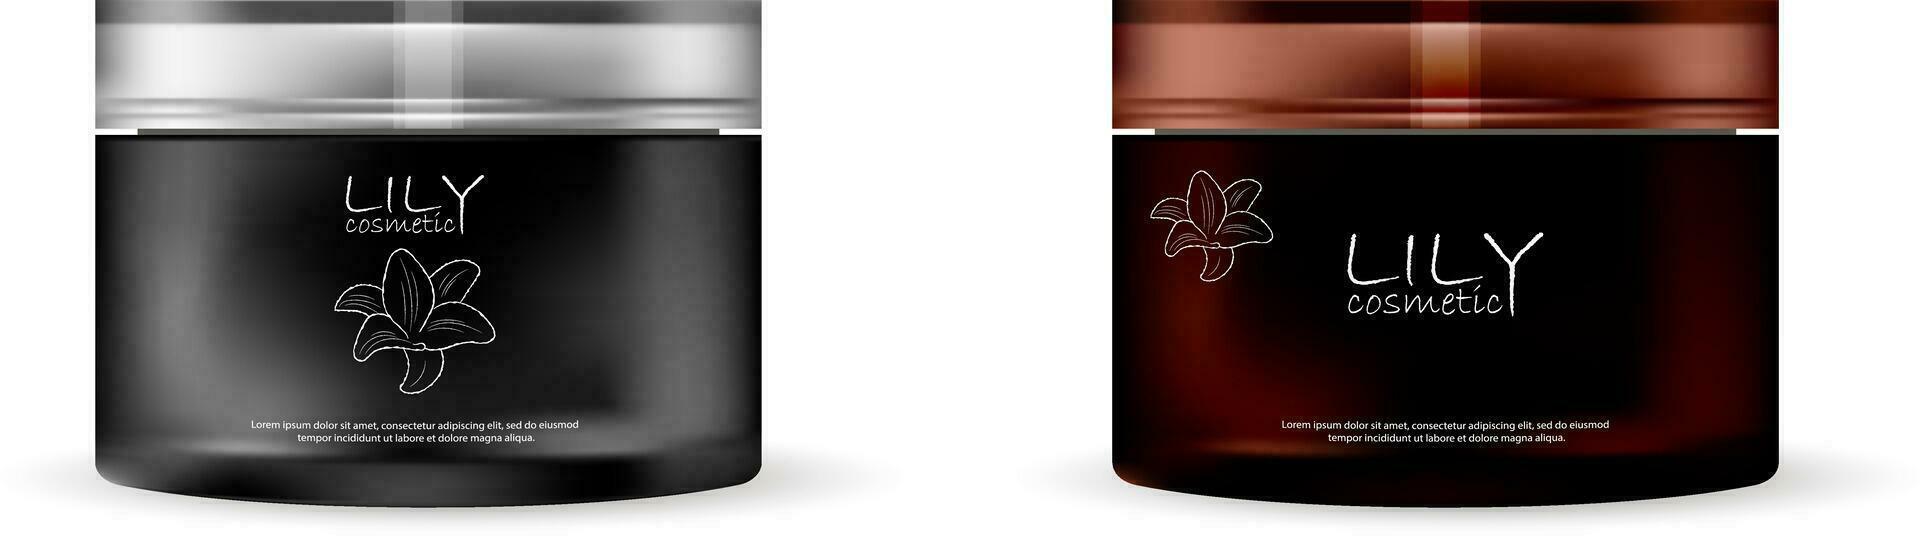 Black and brown glass plastic cosmetic cream jar set with closed lid. REalistic vector illustration with different slyle logo design.